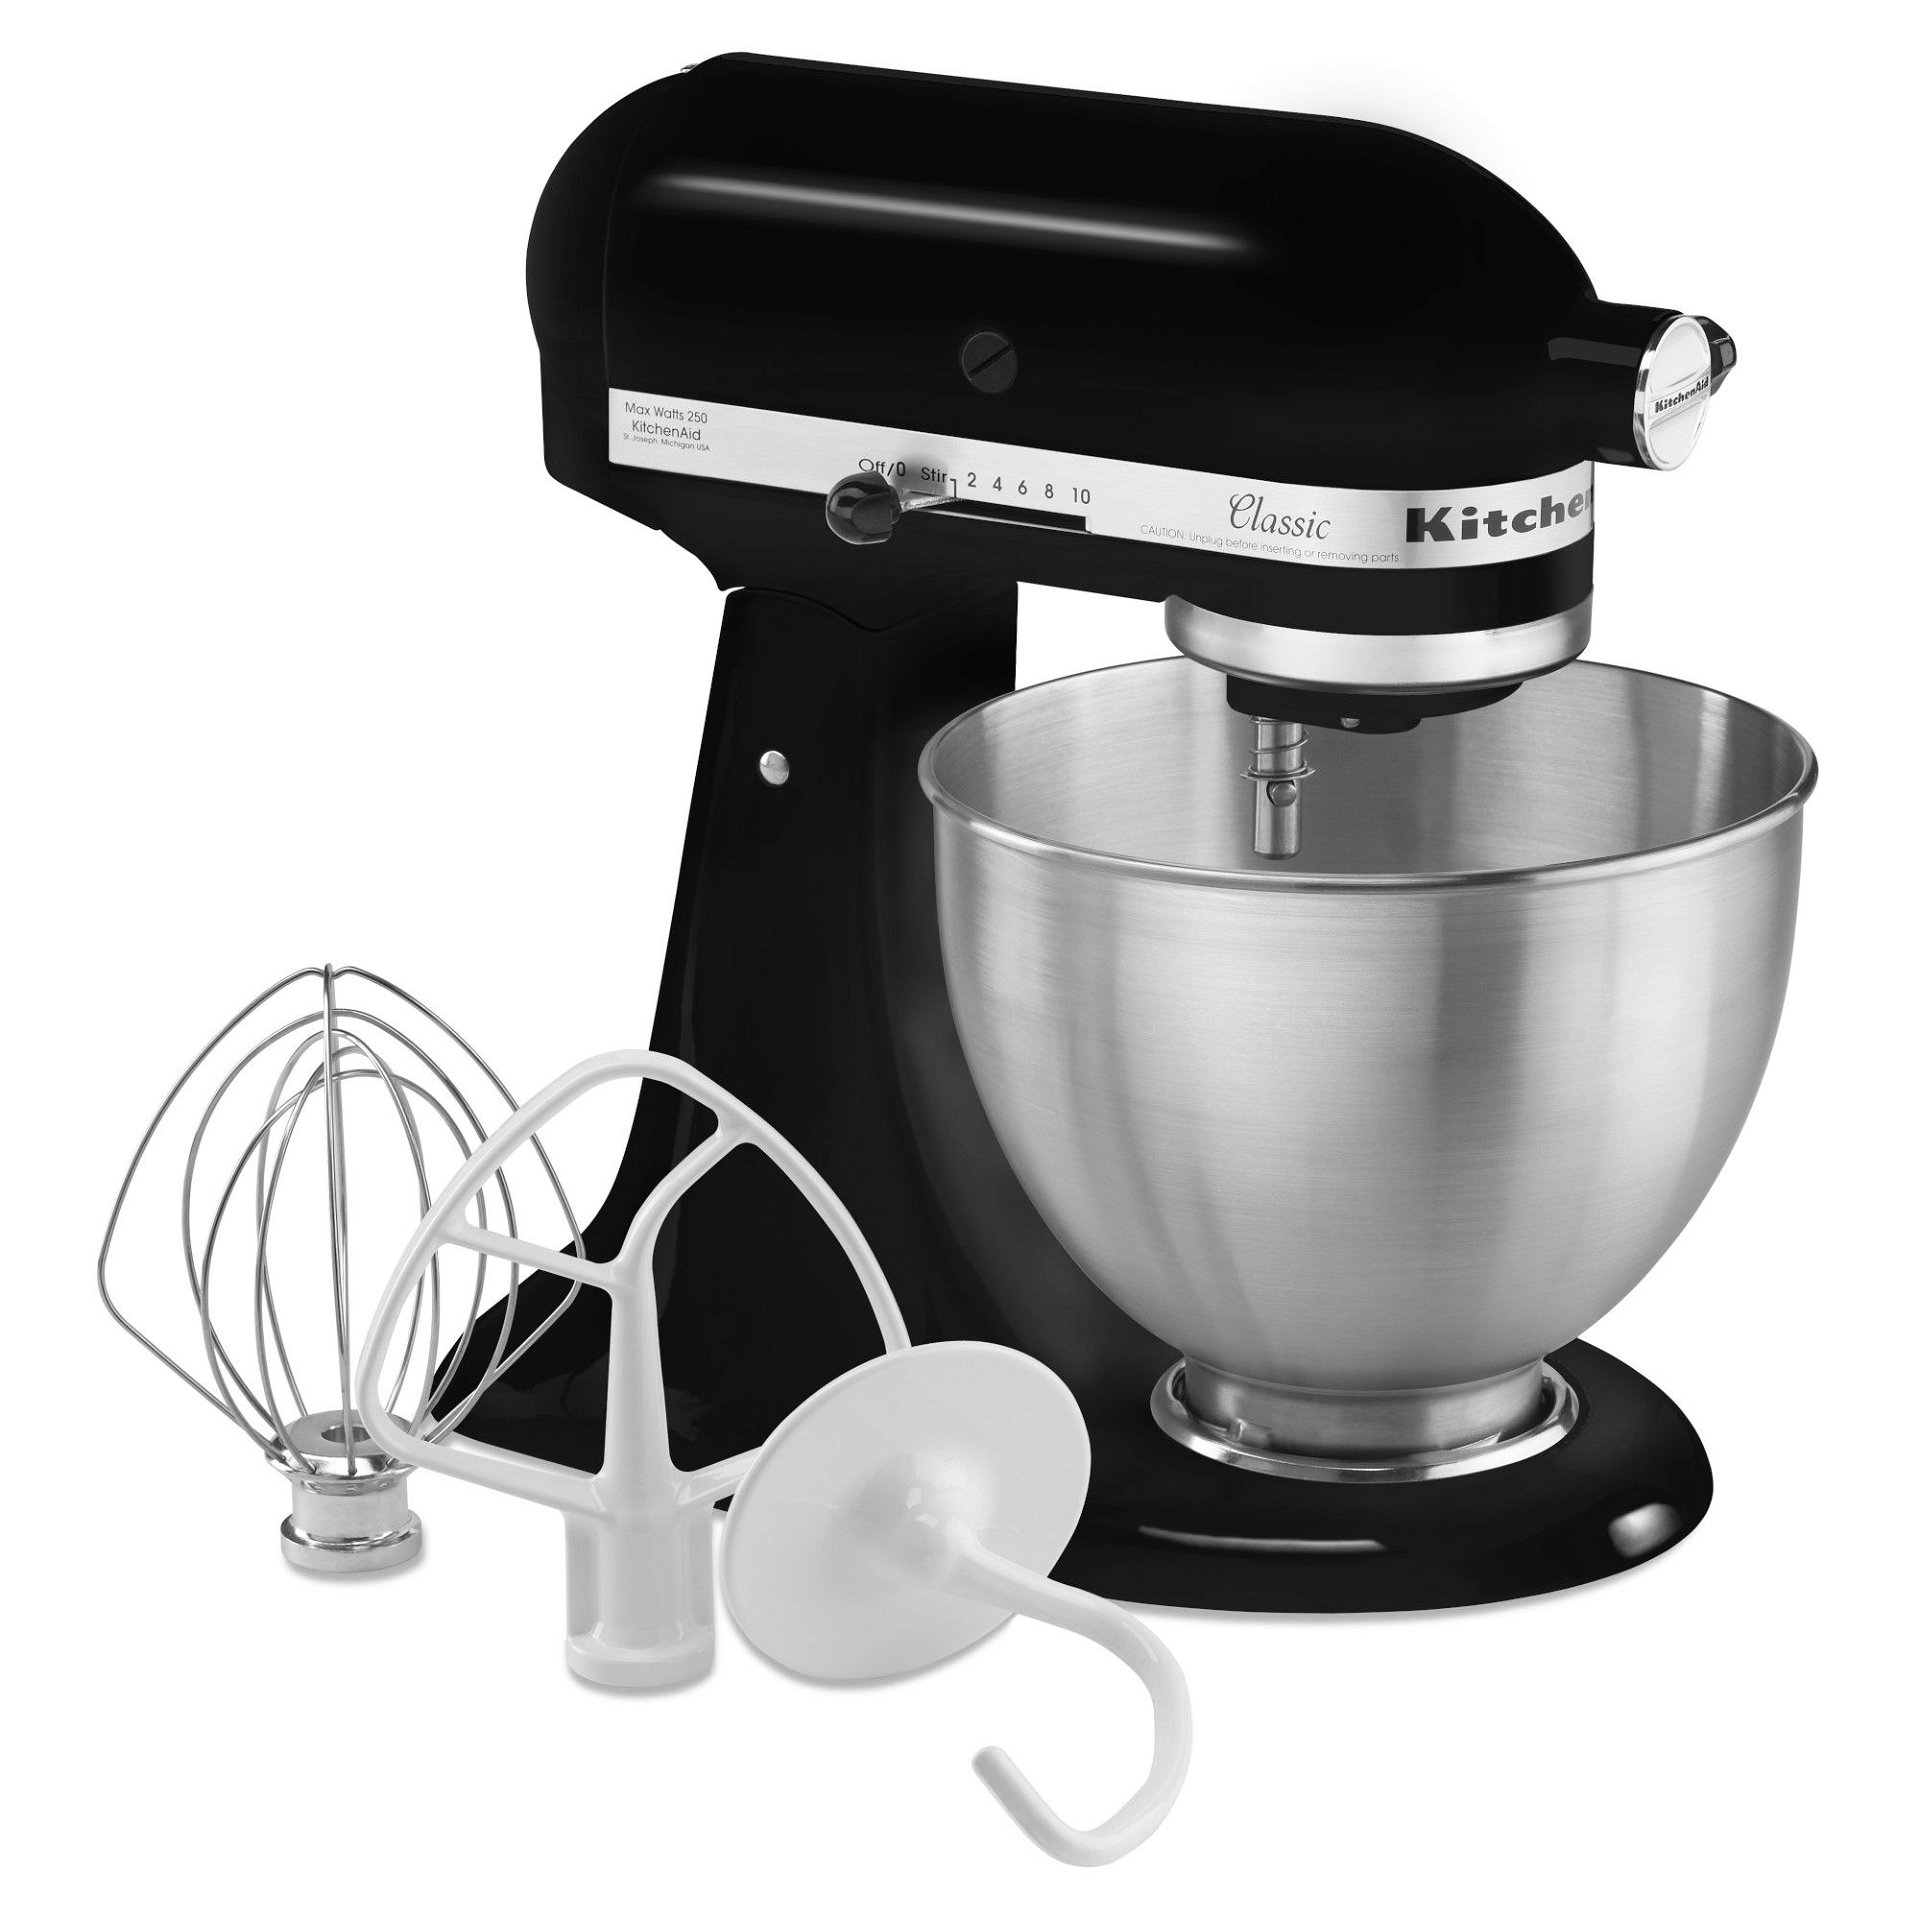 KitchenAid Classic Series 4.5 Qt. Stand Mixer With Tilt-Head Onyx Black for  Sale in Modesto, CA - OfferUp